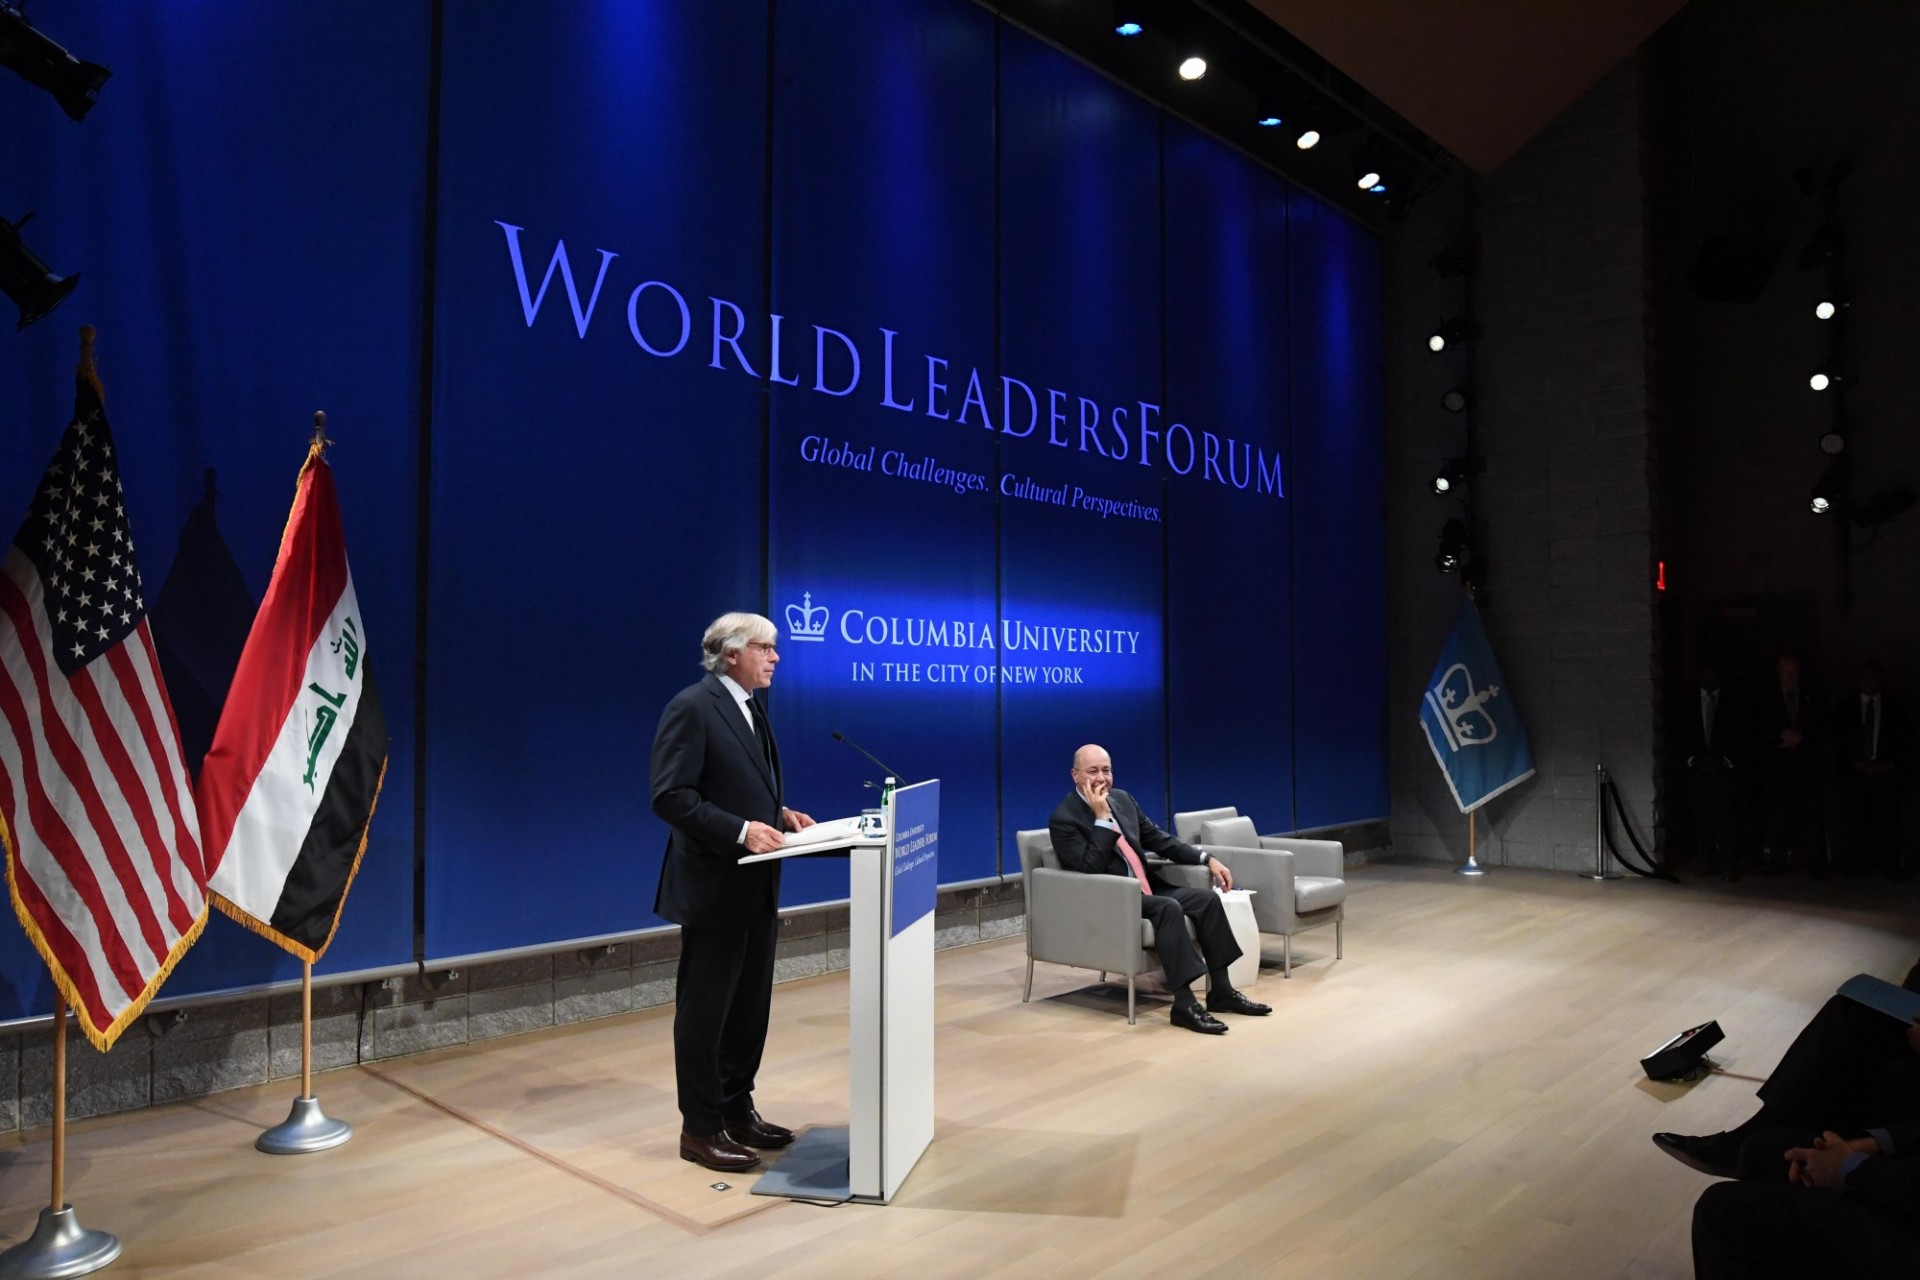 Lee C. Bollinger, President of Columbia University in the City of New York begins the World Leaders Forum with an introduction of President Barham Salih of Iraq..